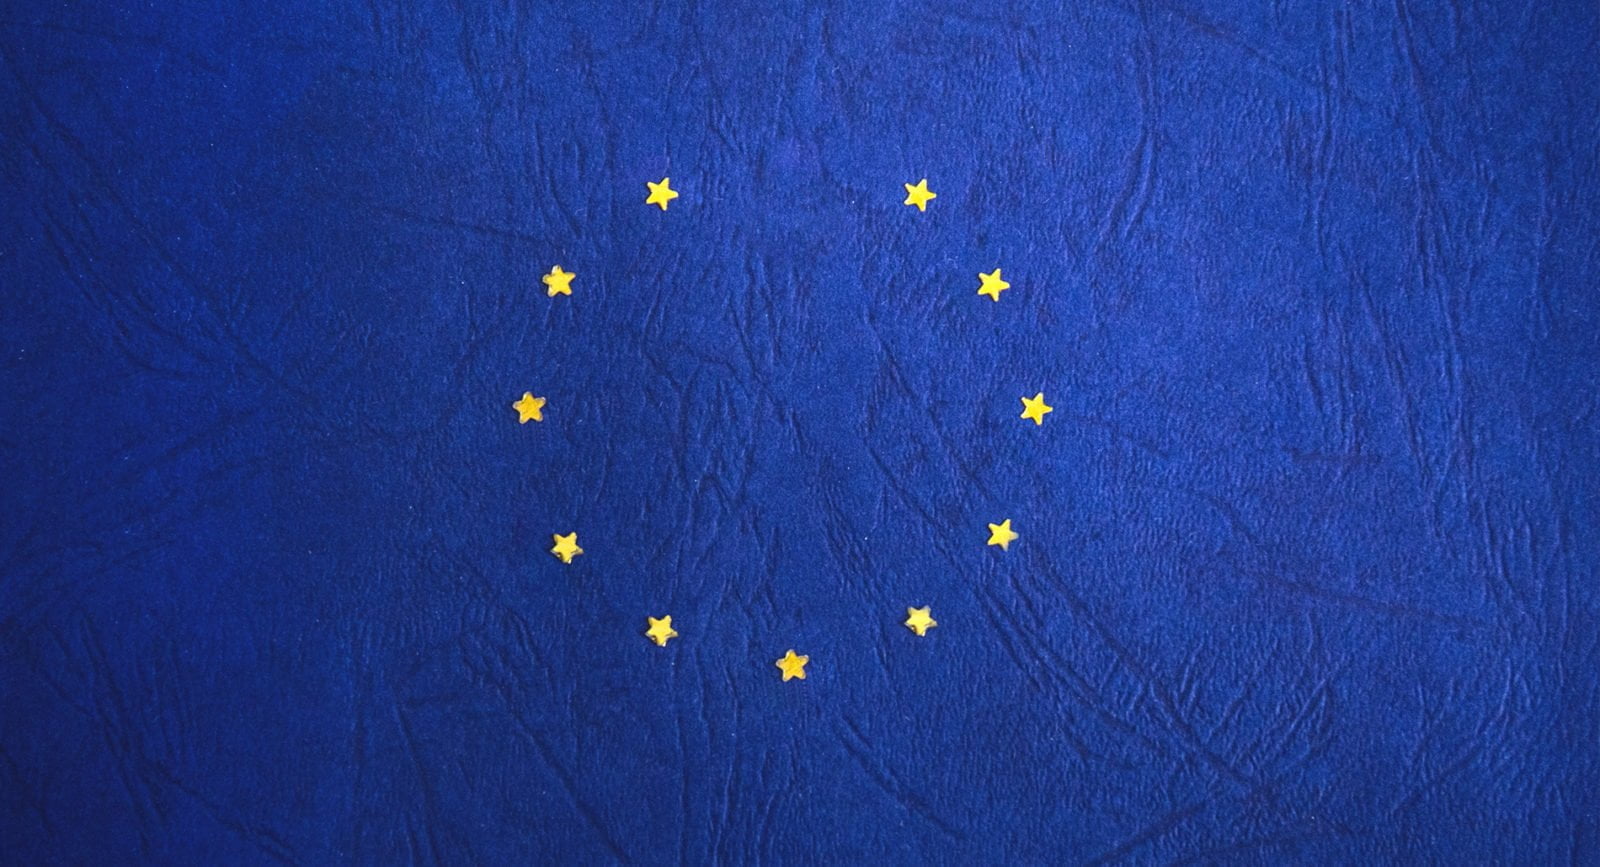 A graphic of the EU flag with a star missing.